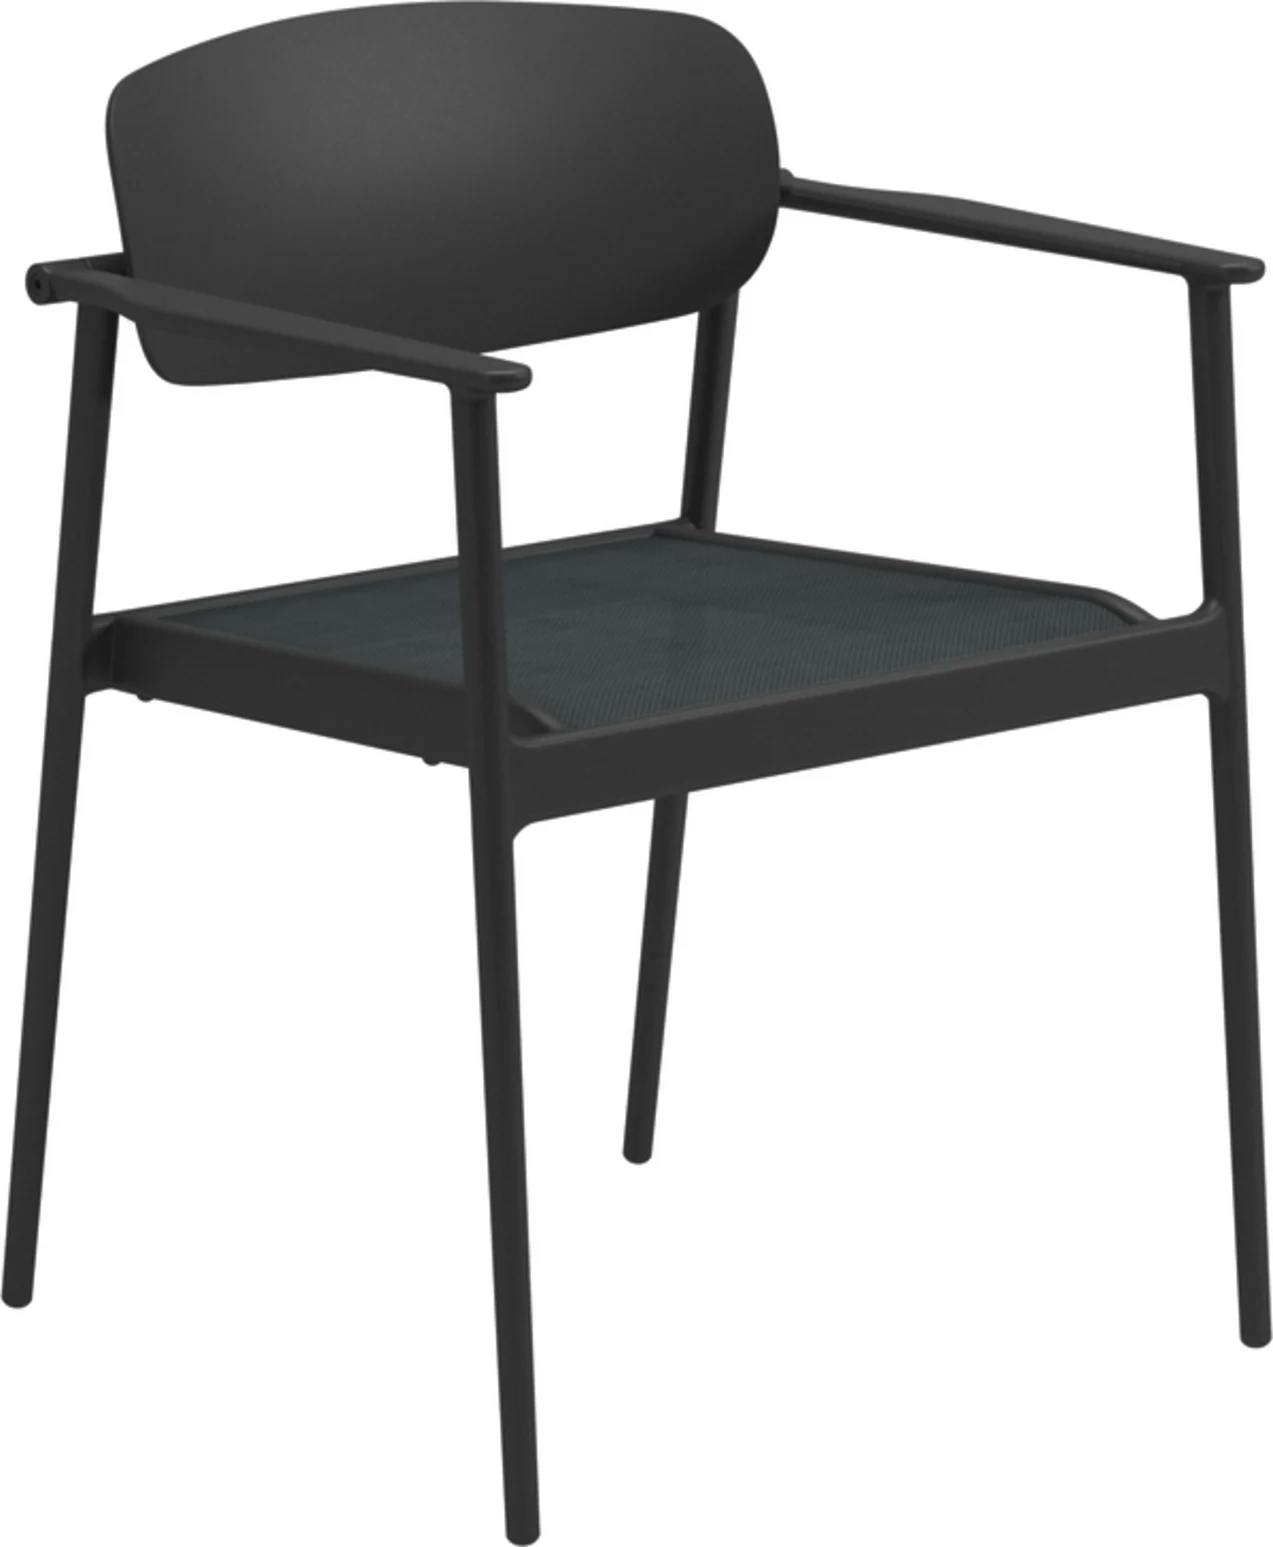 Gloster Allure Stacking Chair with Arms